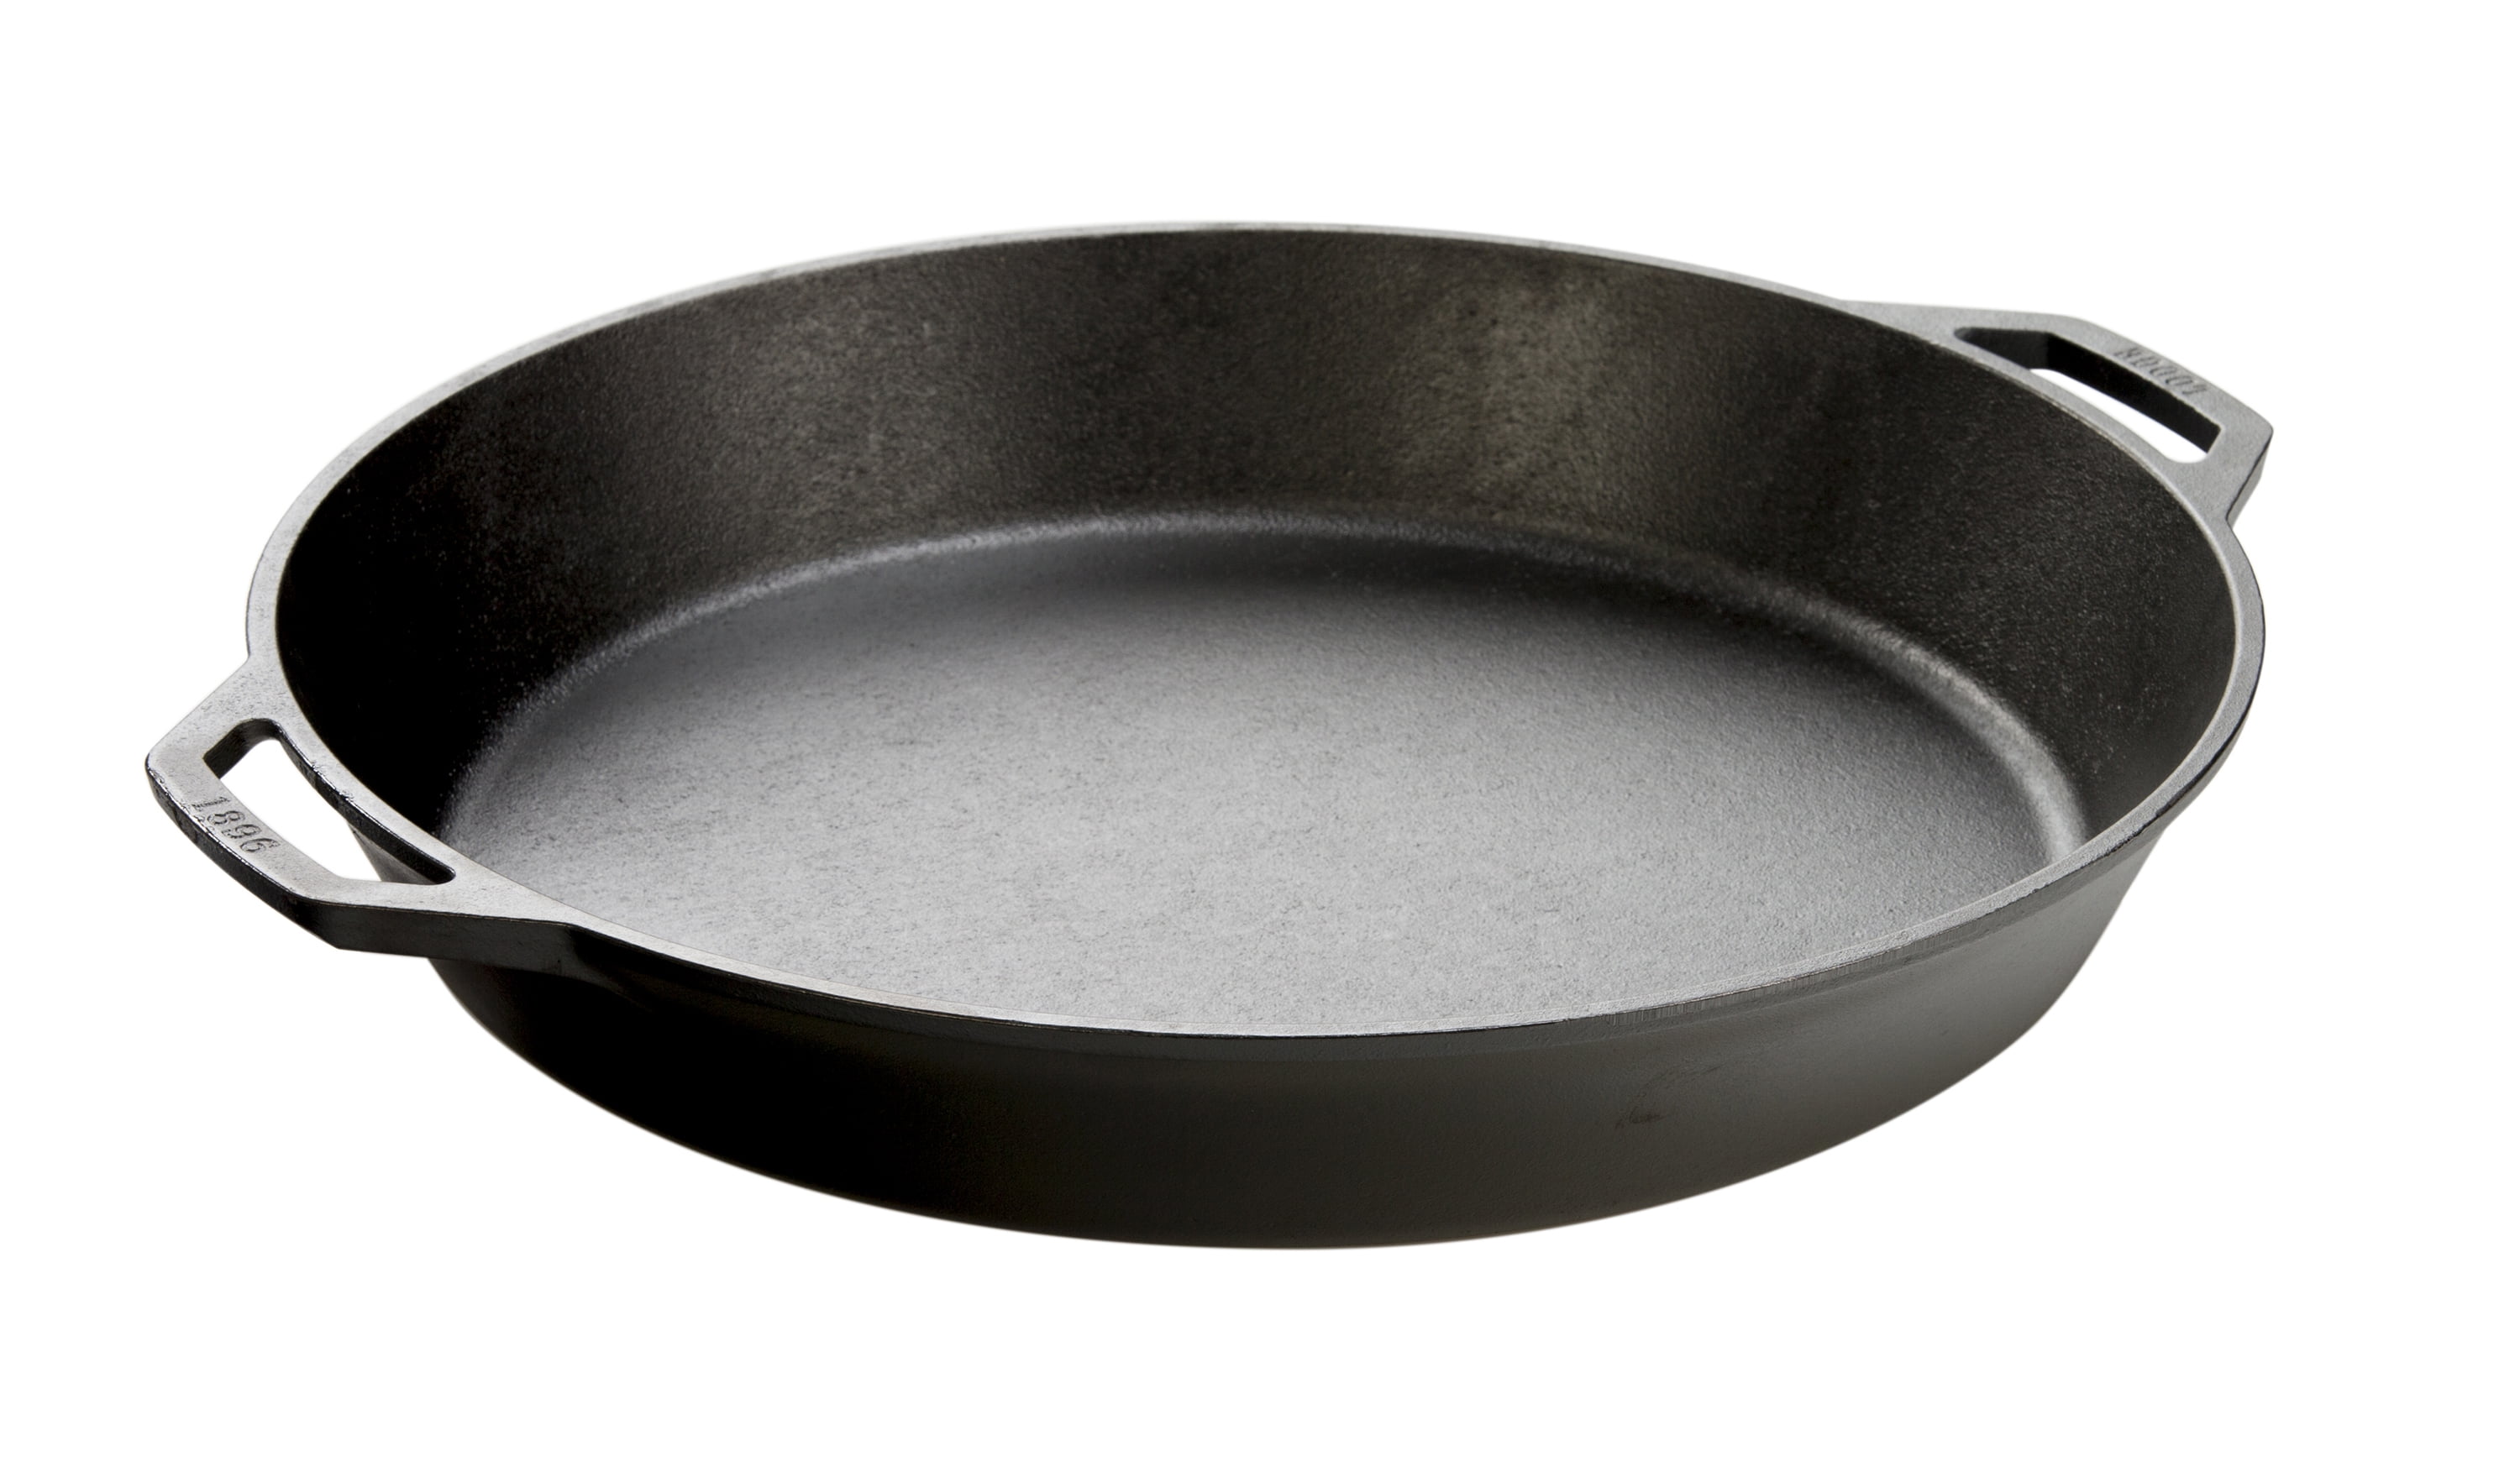 Two Men and a Little Farm: LODGE CAST IRON PIZZA PAN REVIEW